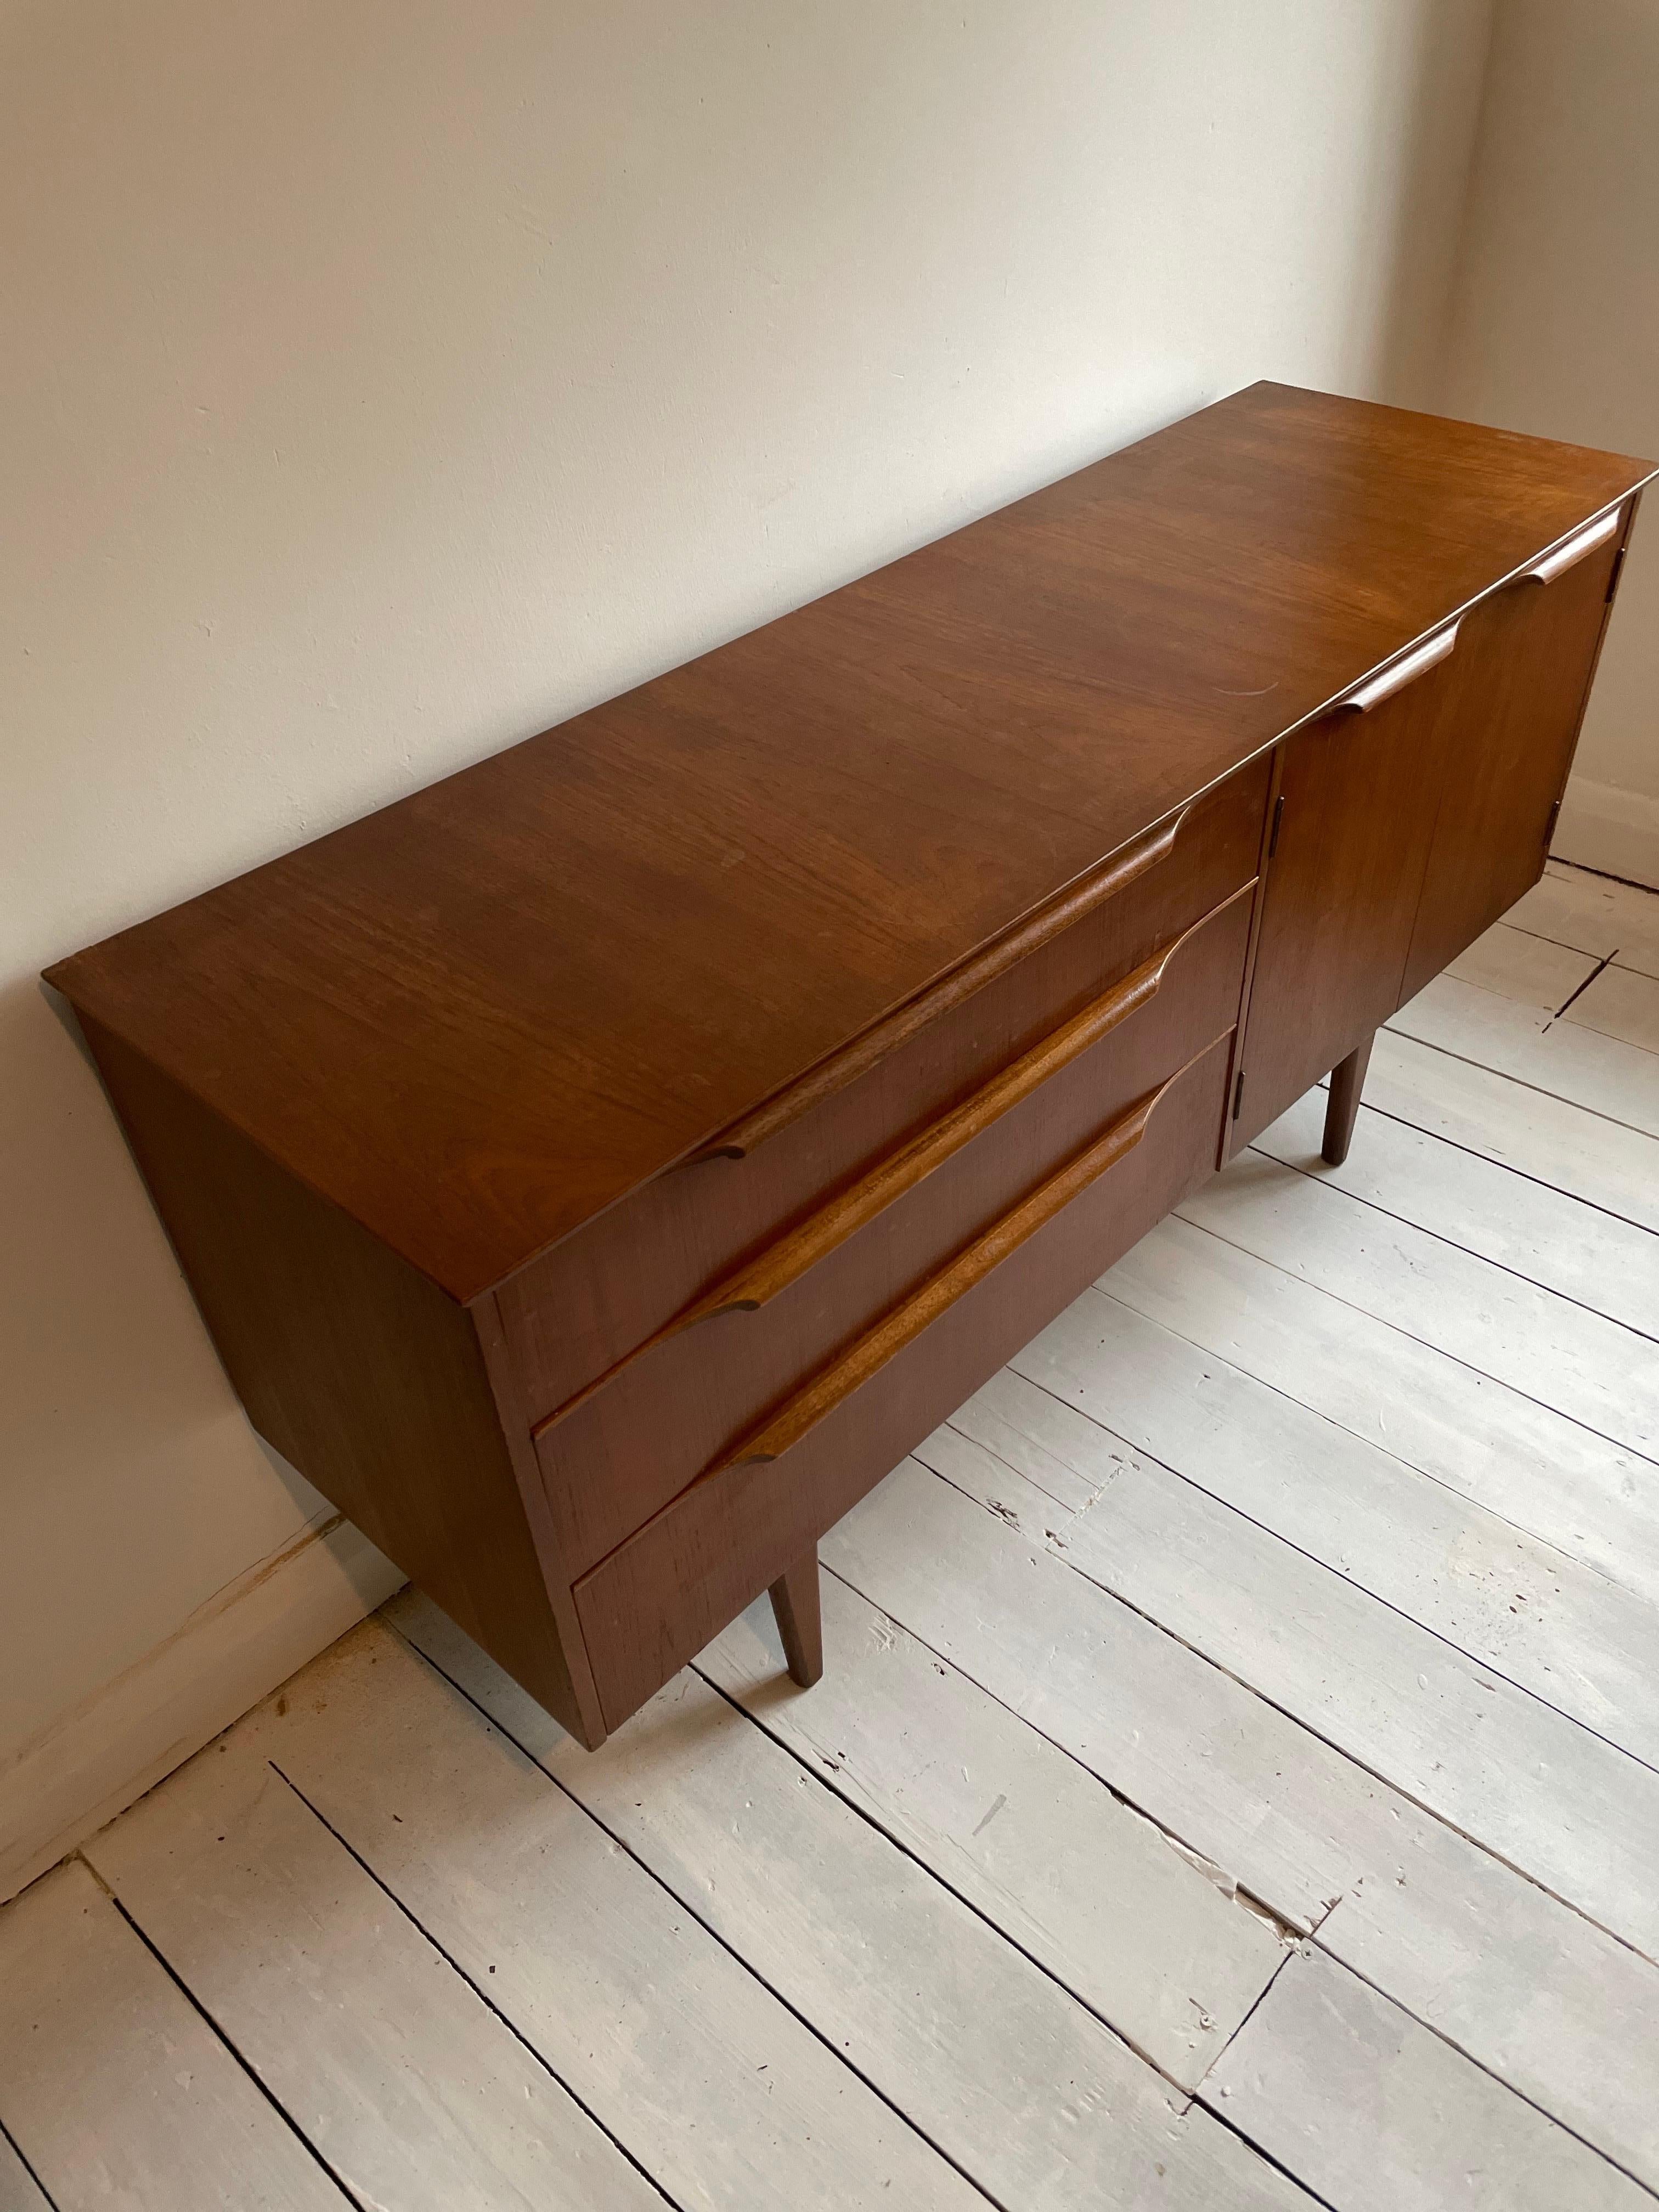 A beautifully designed & crafted 1960s teak sideboard manufactured by Stonehill Furniture.

Featuring teak handles, two shelved cupboards. The teak has a lovely vintage golden patina that only age can achieve.

There is also a bank of three drawers.